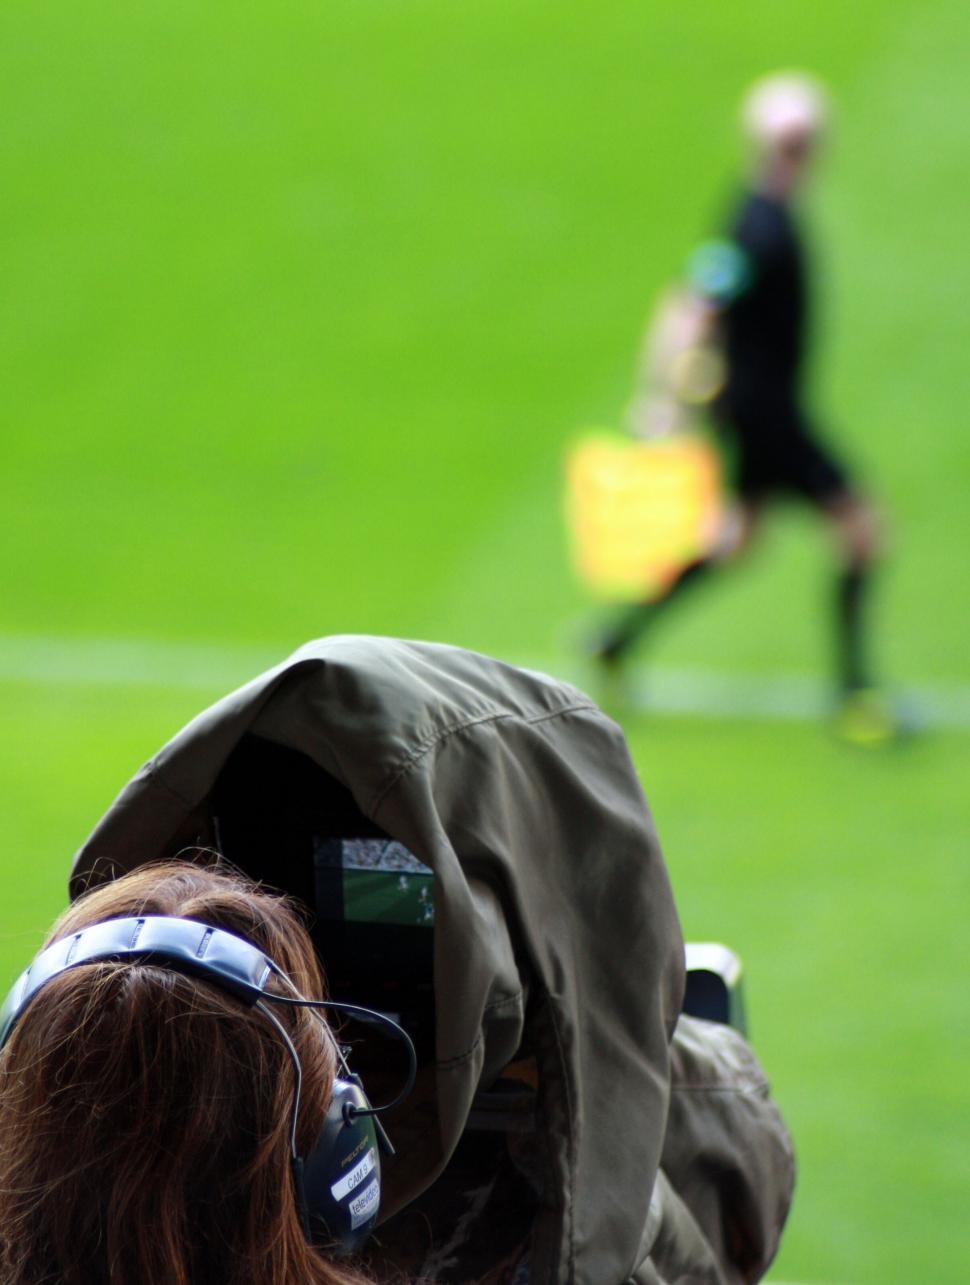 Free Image of Photographer capturing a sports event 